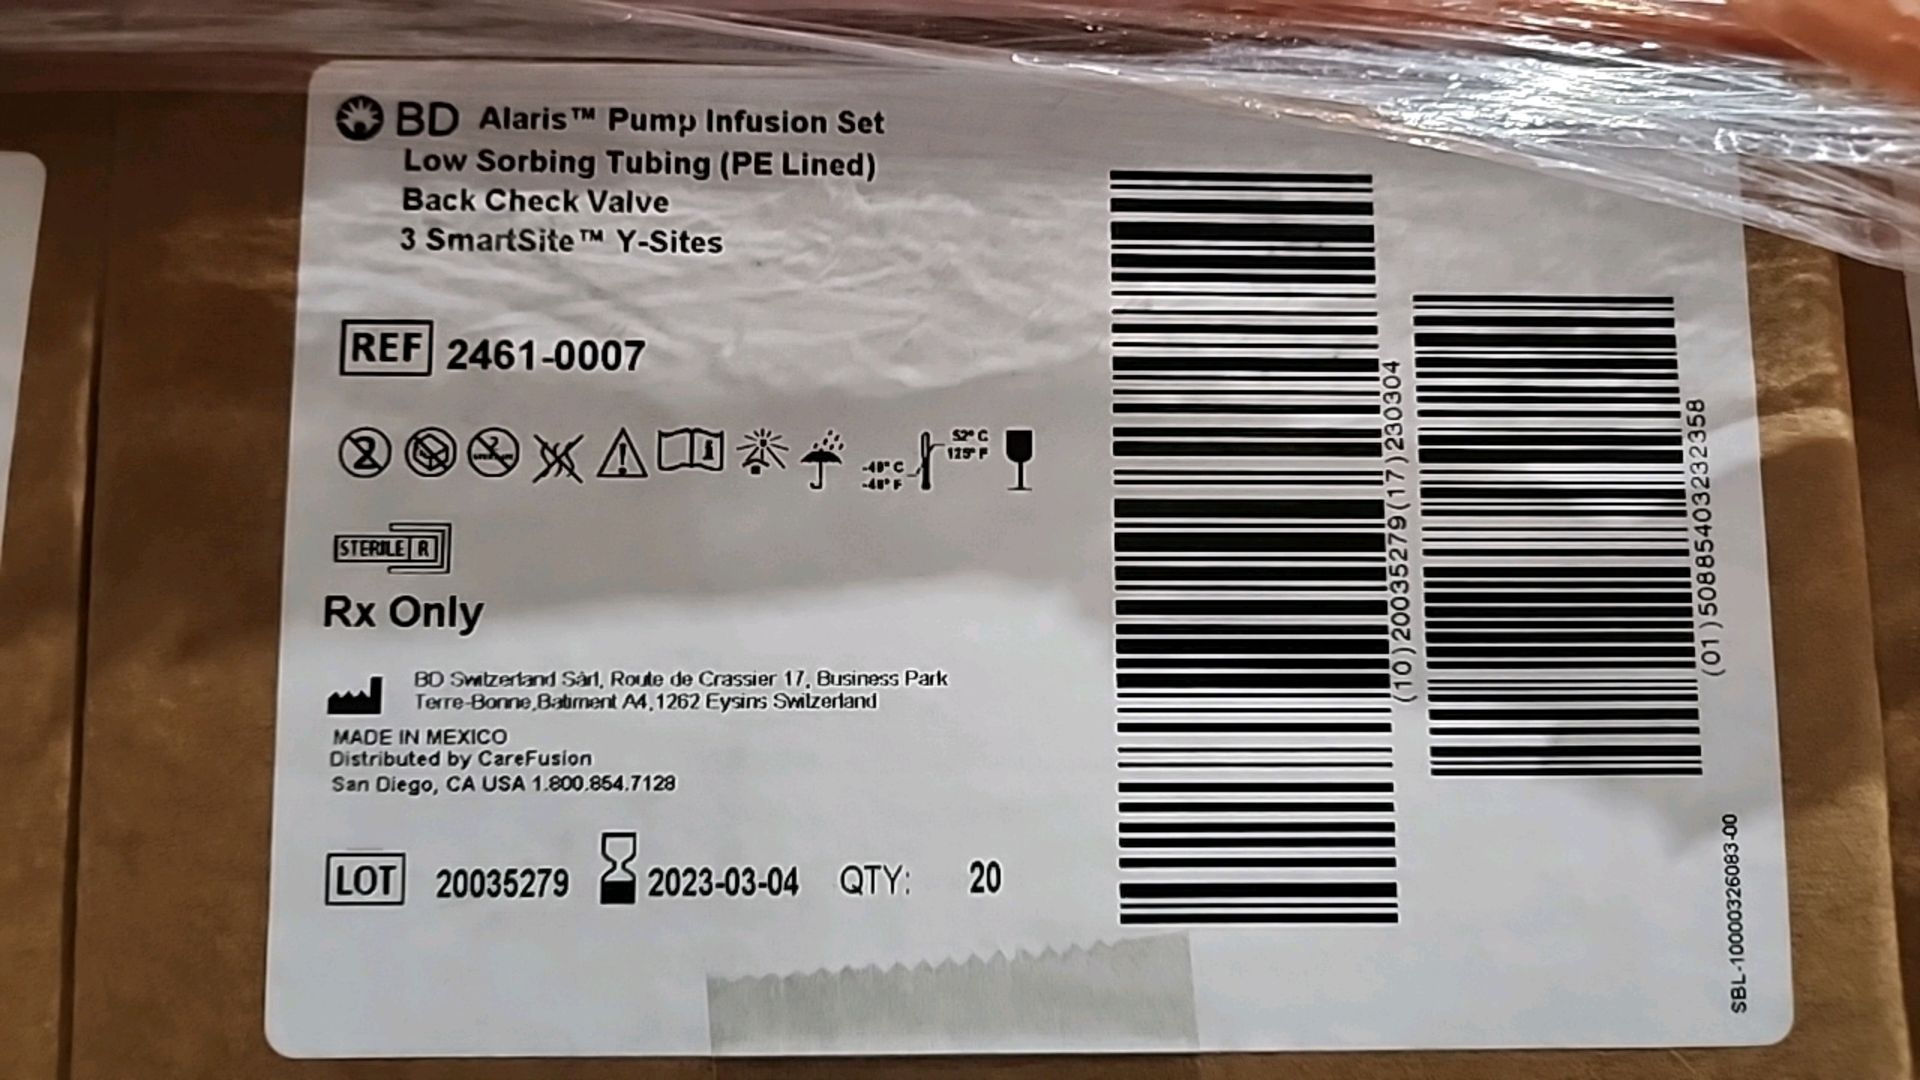 BD REF 2461-0007 ALARIS PUMP INFUSION SET LOW SORBING TUBING (PE LINED) (NOT IN DATE) LOCATION: - Image 4 of 4